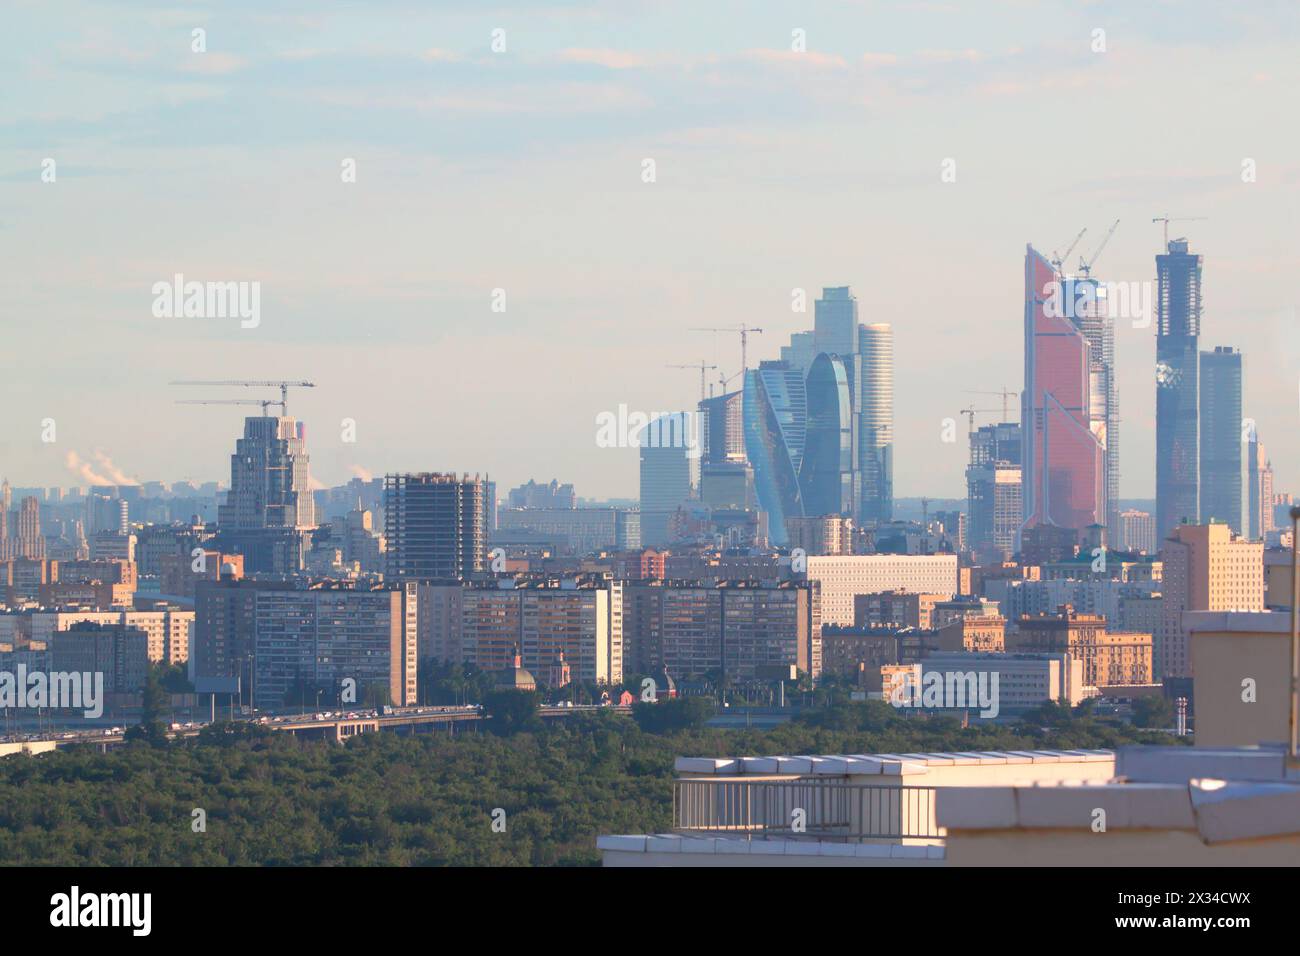 MOSCOW, RUSSIA - JUN 24, 2014: Building of Moscow International Business Center (Moscow-City). Construction of complex began in 1995 and continues. Stock Photo